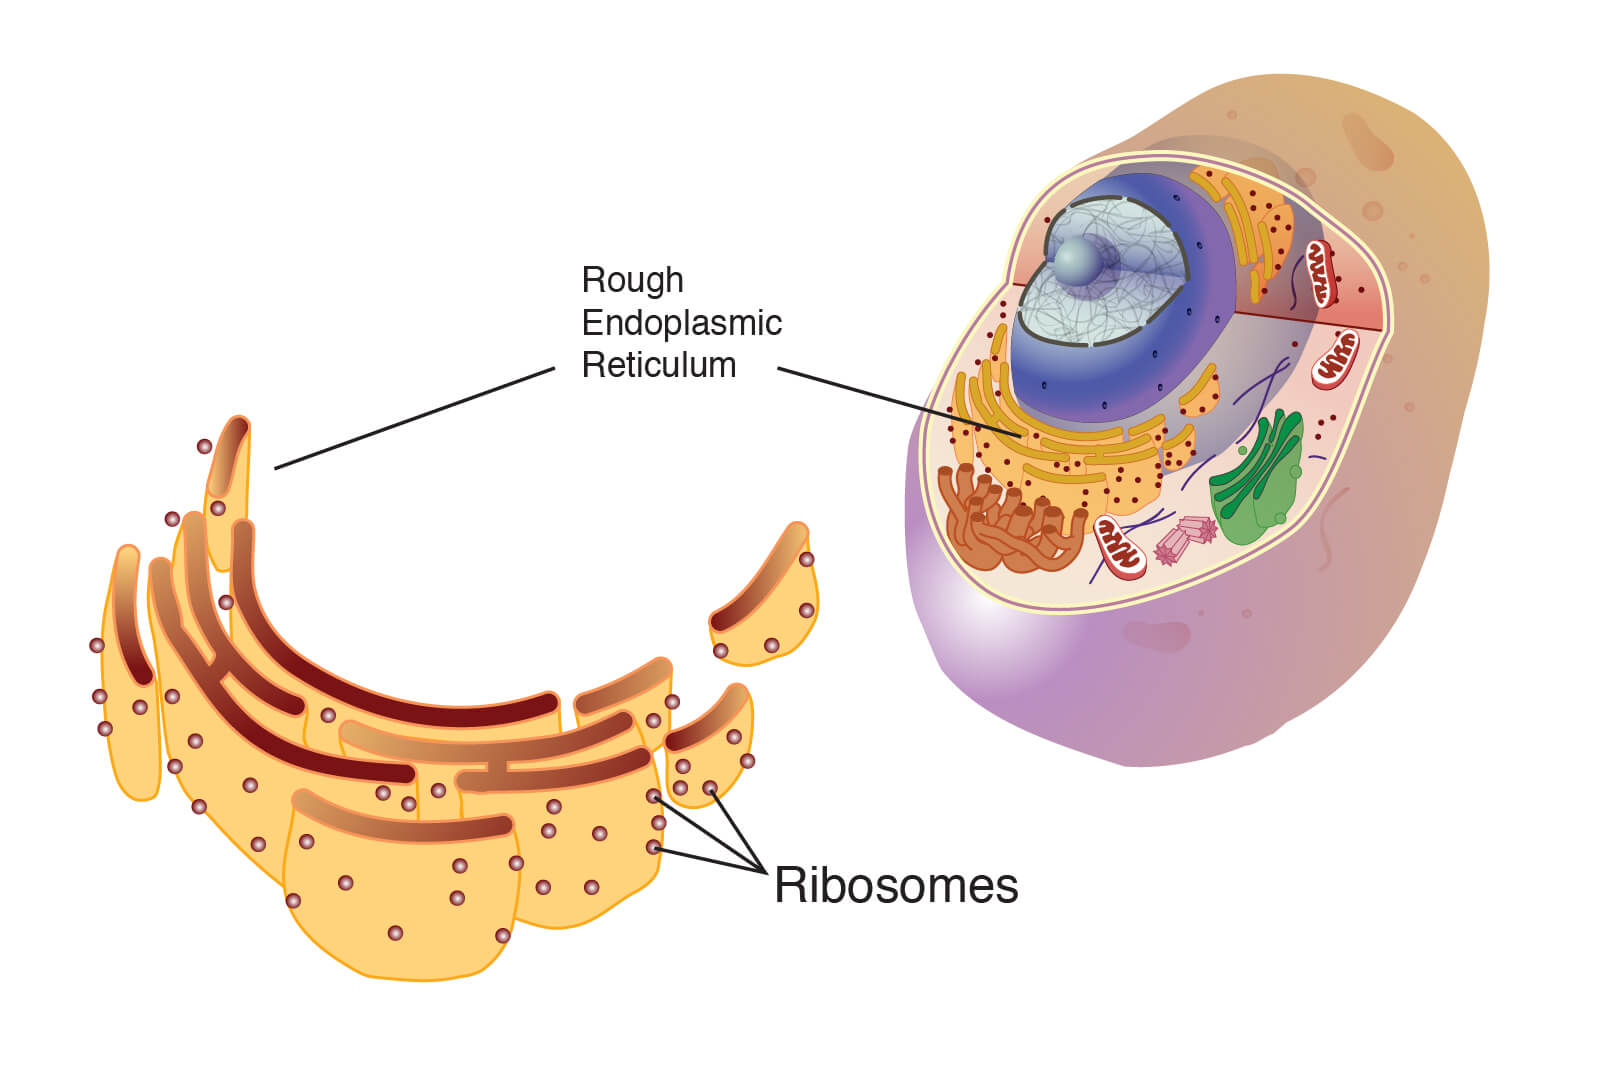 10 Characteristics Of Ribosomes - What is the Function of Ribosomes?